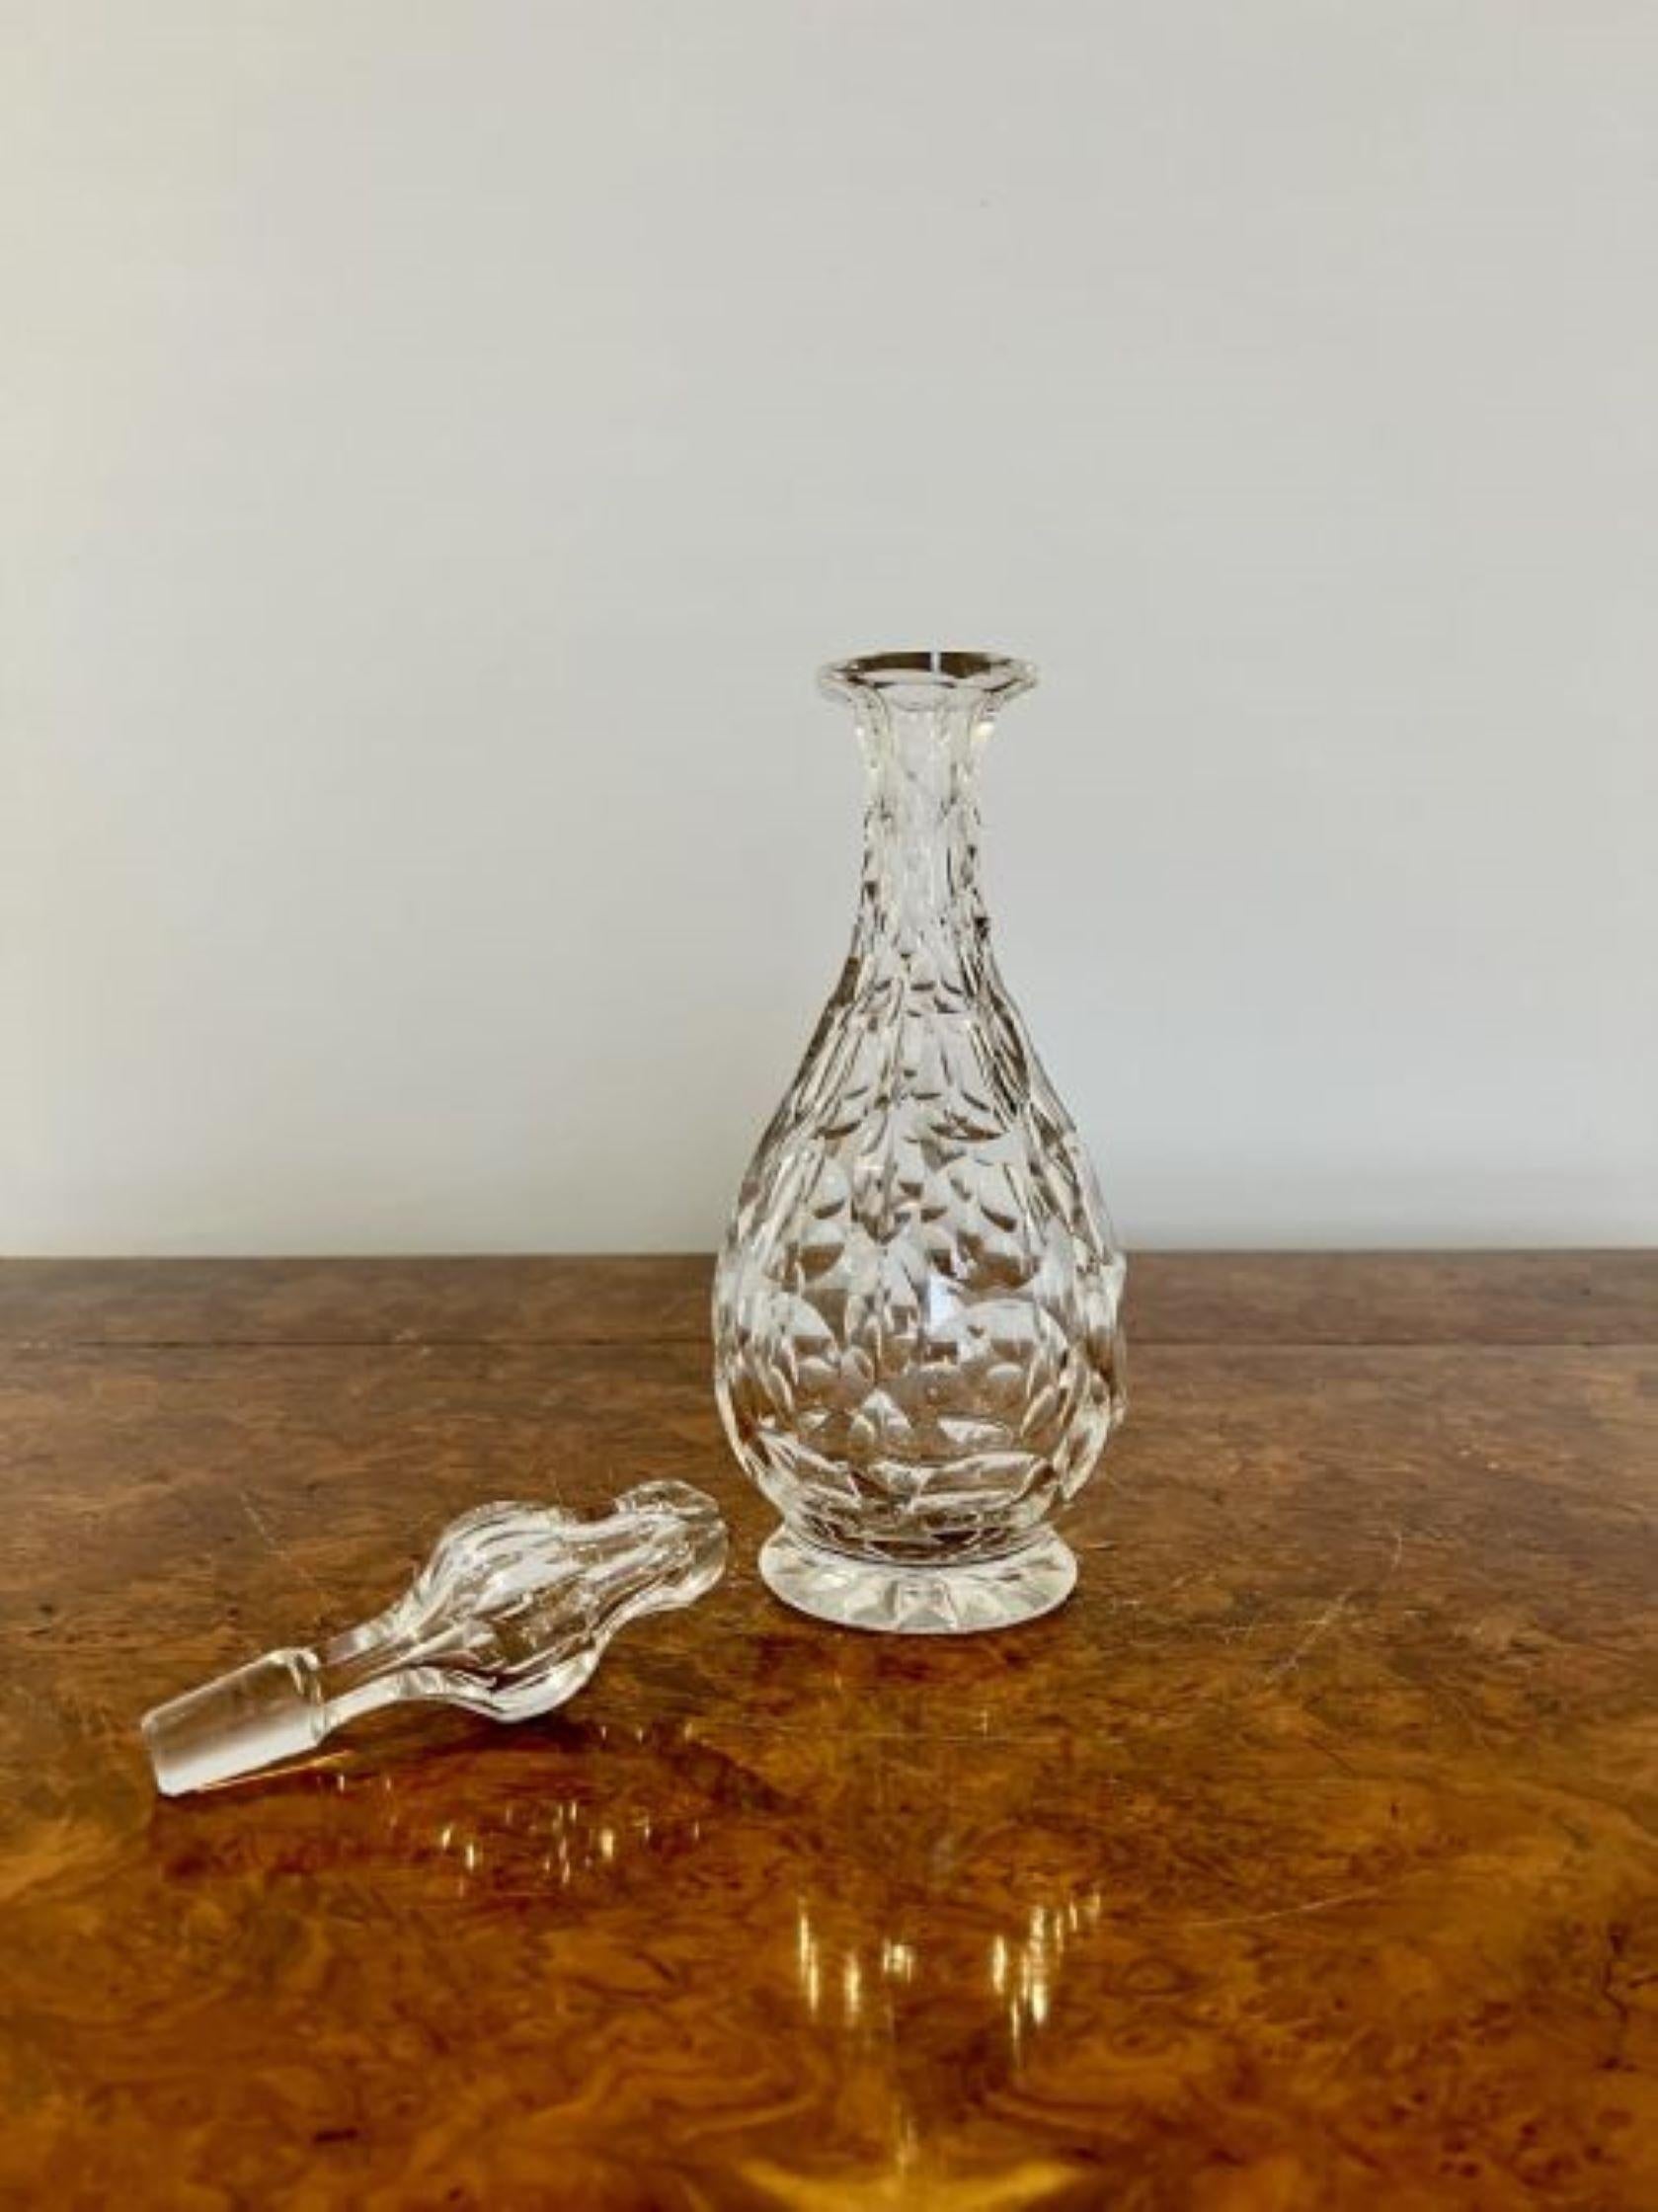 Quality antique Edwardian cut glass bell shaped decanter having a quality antique Edwardian cut glass decanter with the original stopper 